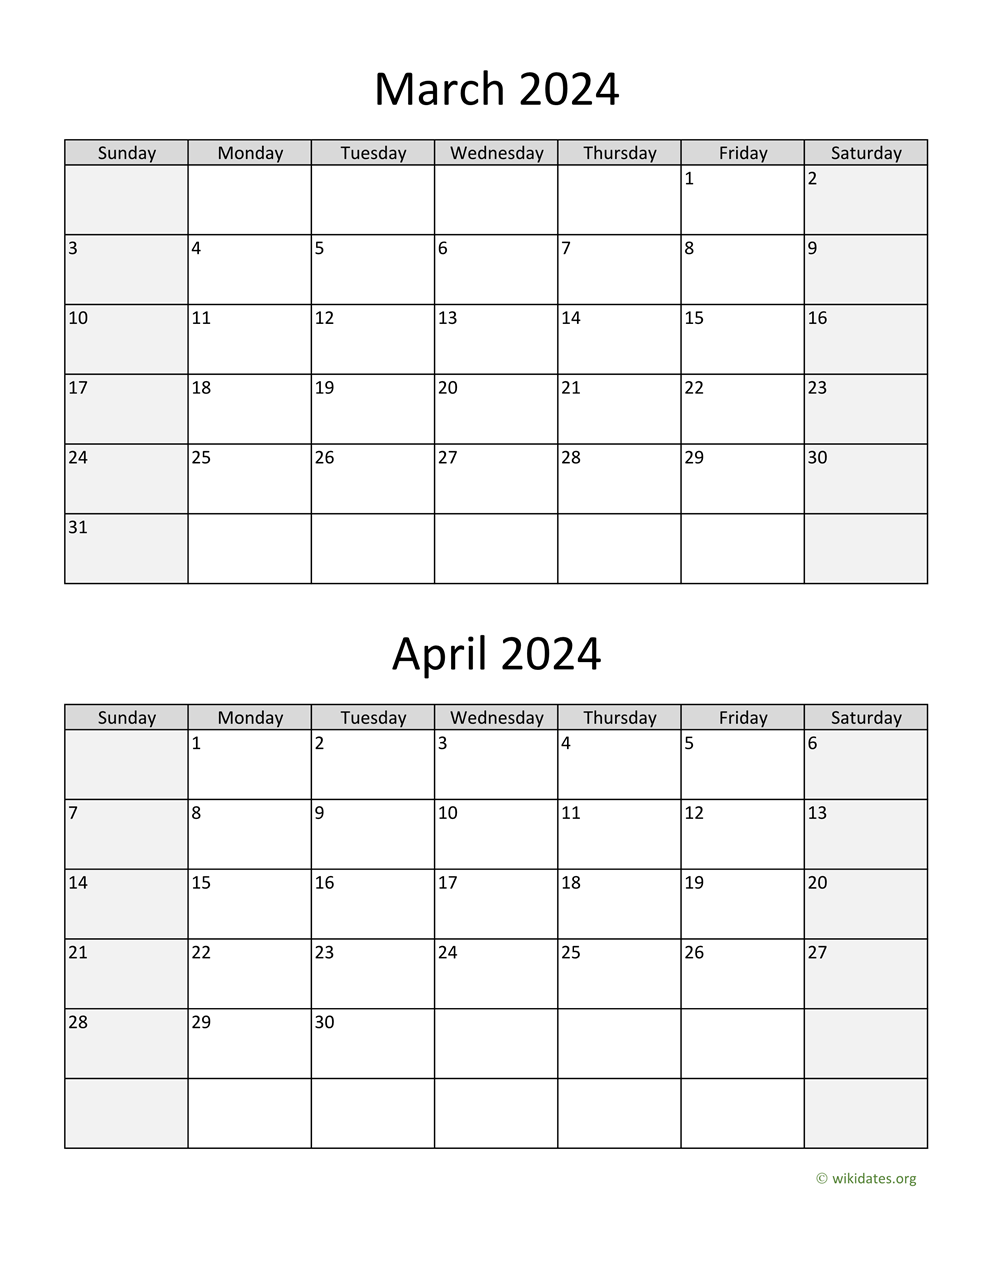 March And April 2024 Calendar | Wikidates for Printable Calendar March April May 2024